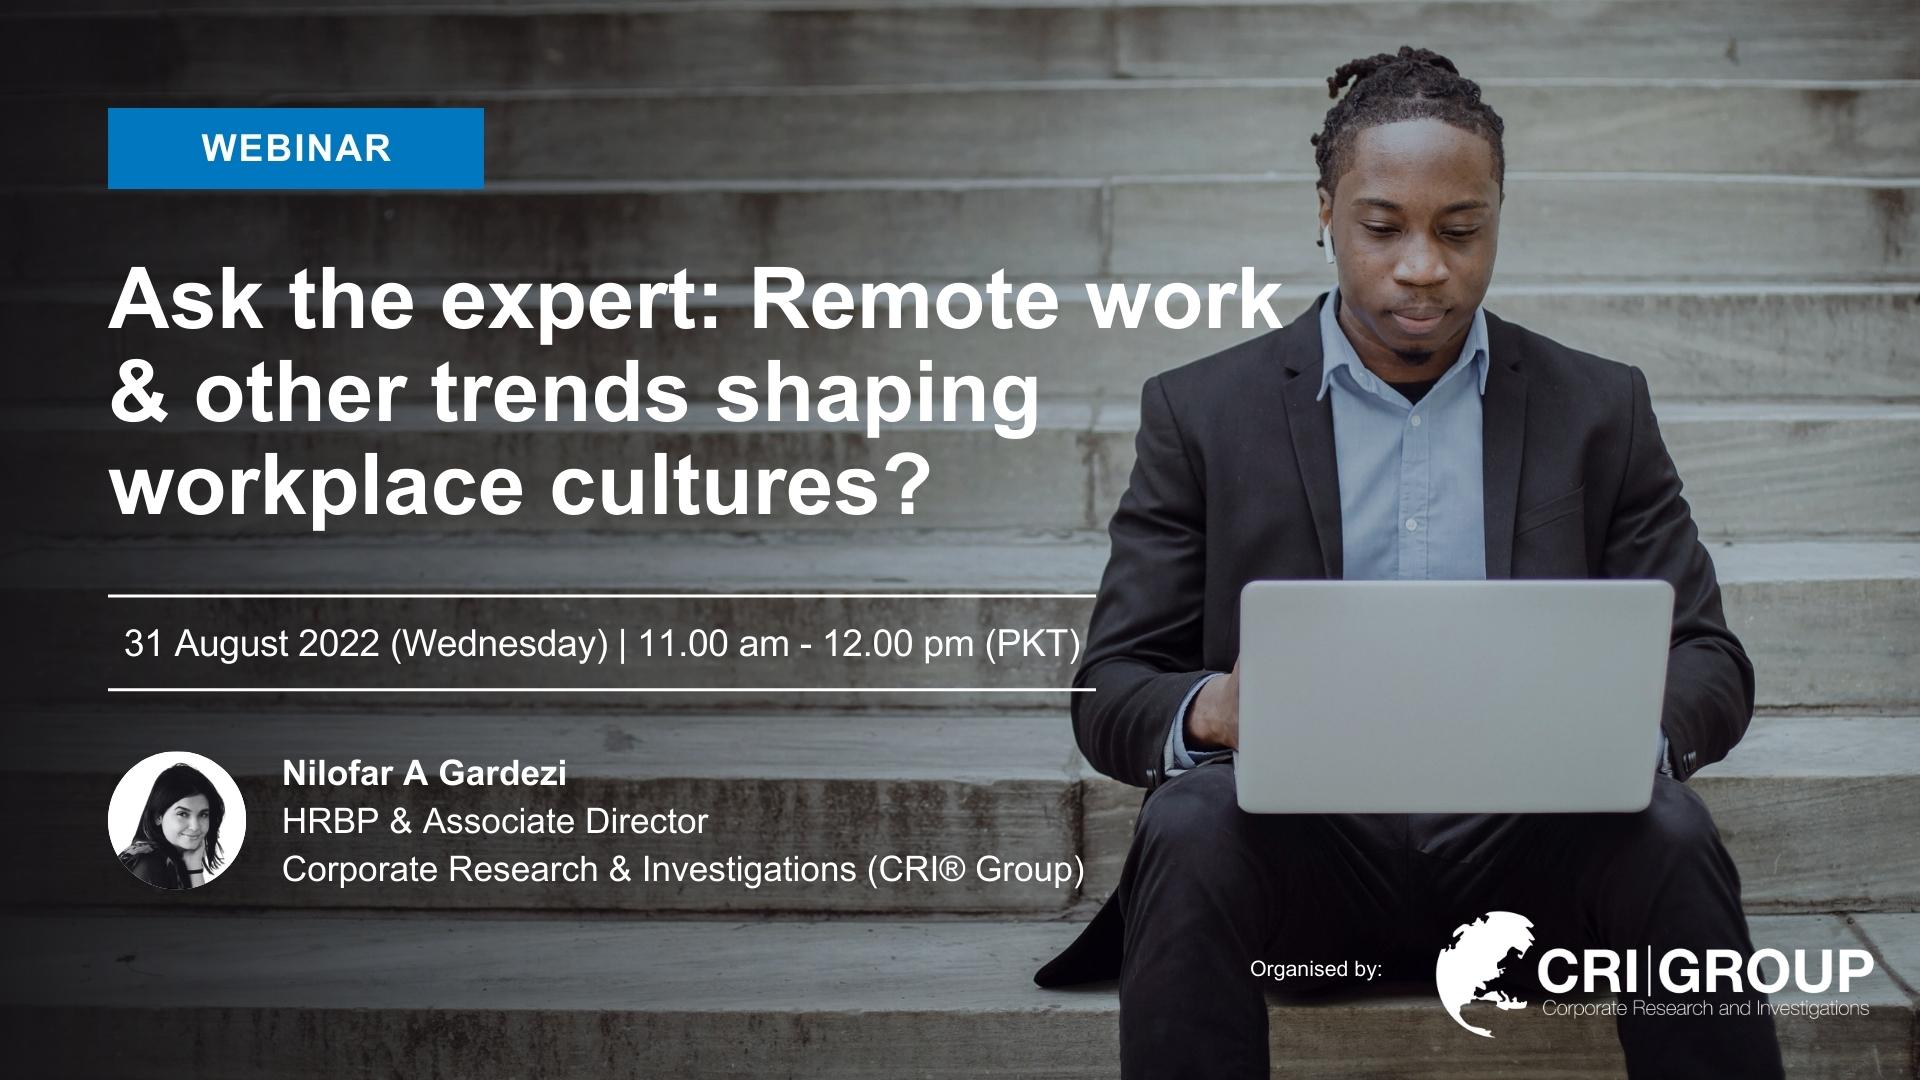 WEBINAR RECORDING | CRI® Group to conducted a live training session on 'Remote work & other trends shaping workplace cultures'